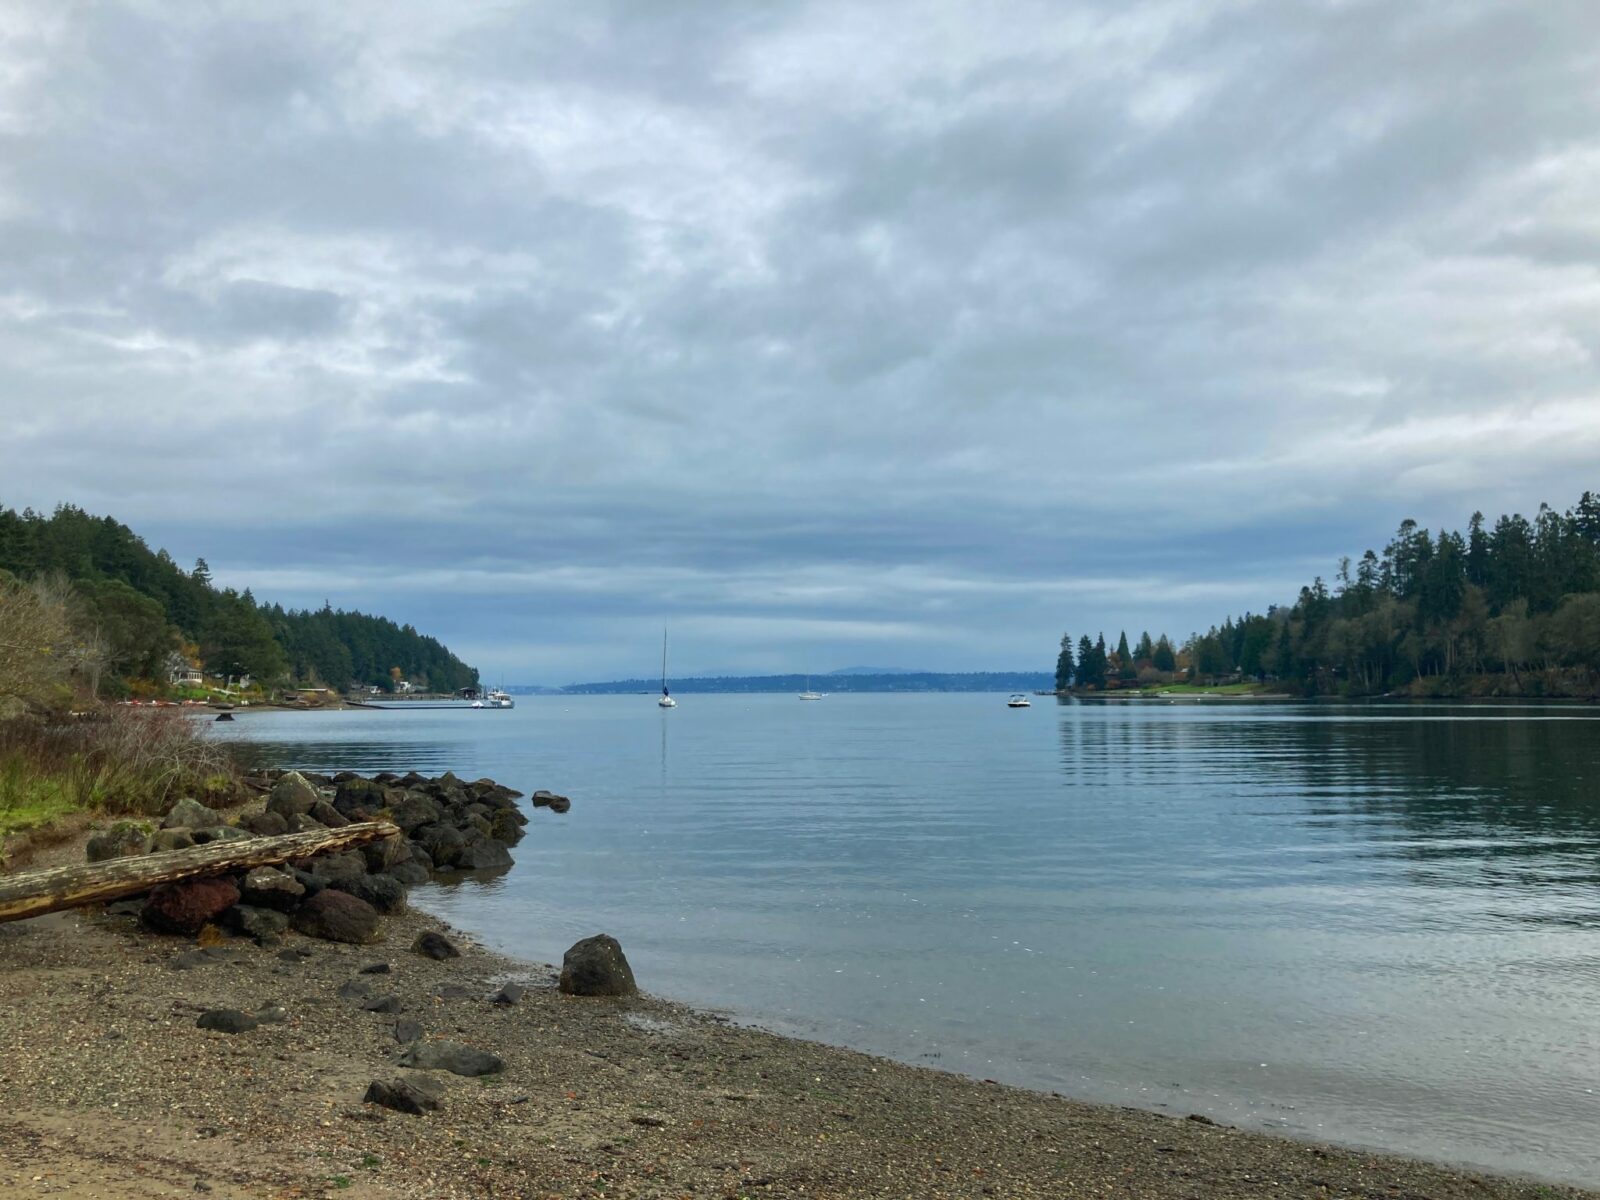 One of the hikes on bainbridge island leads from Fort Ward to the head of Blakeley Harbor in Blakeley Harbor park. The park has a rocky beach that is surrounded by evergreen trees. The harbor is shallow and narrow, with a few boats anchored in the distance.